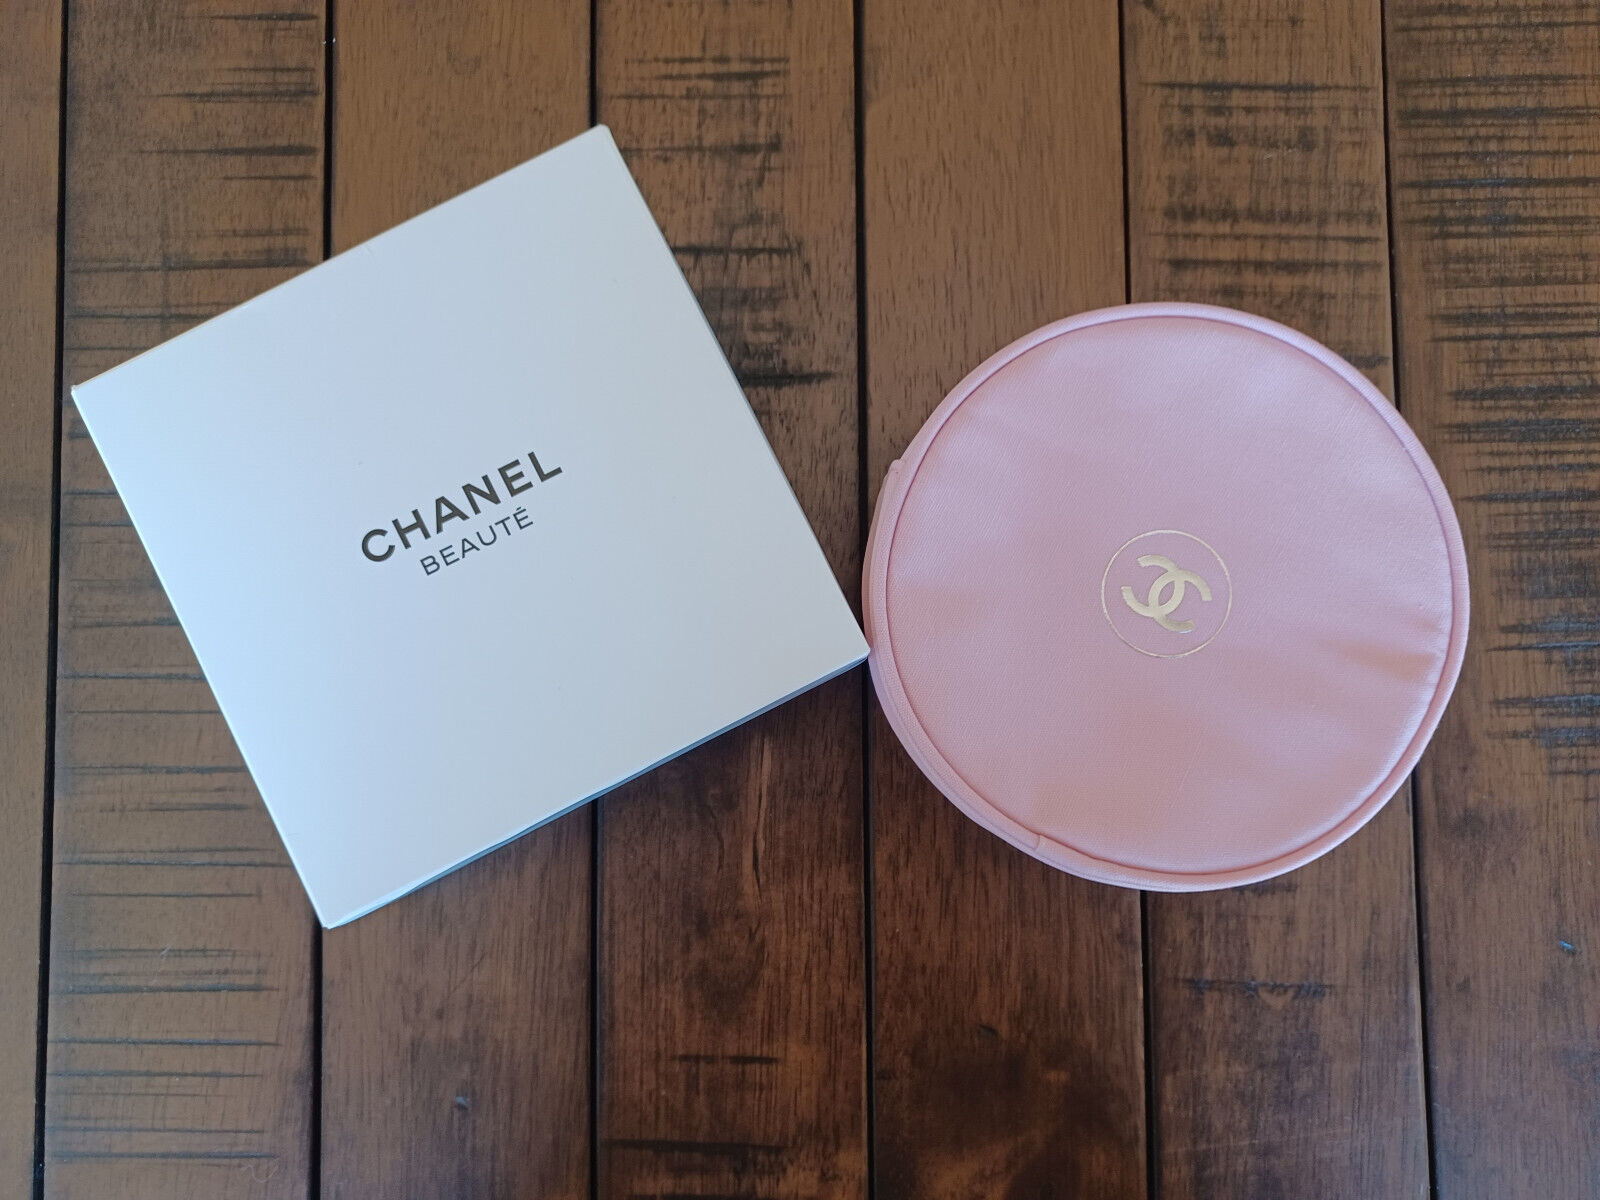 New Chanel Beaute Cosmetic Bag / Makeup Pouch and 50 similar items